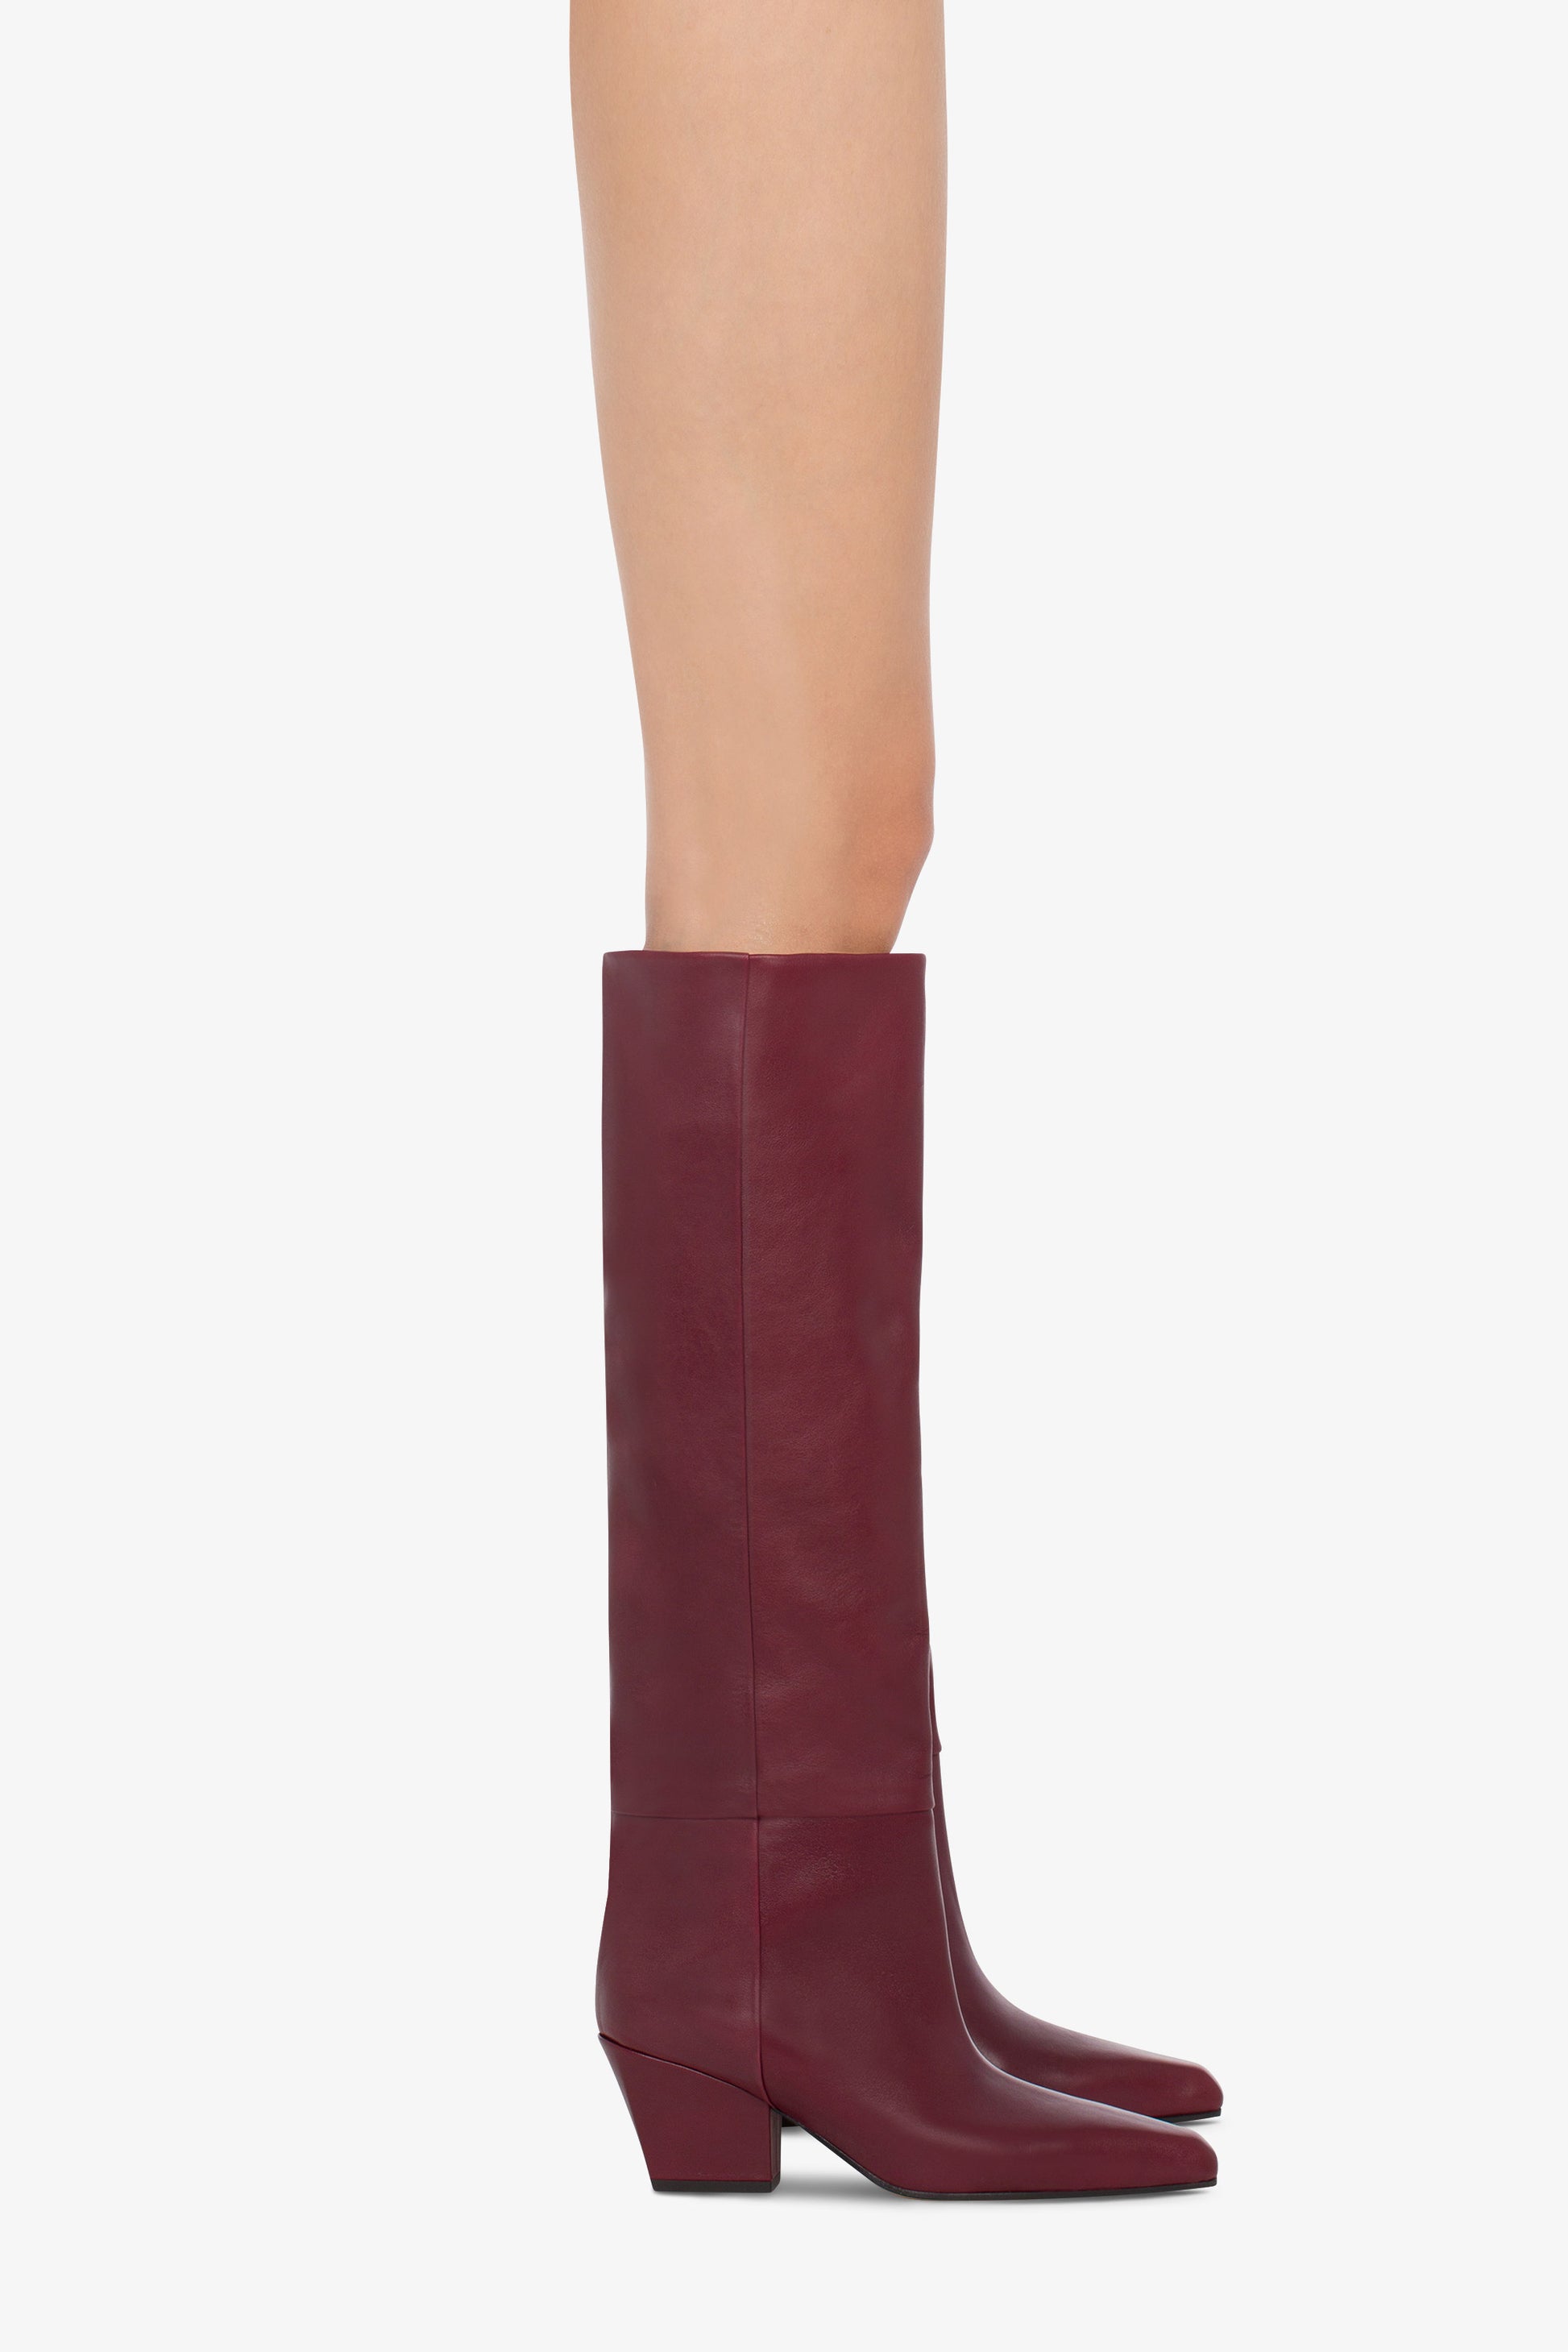 Knee-high, long pointed boot in supple rouge noir leather - Indossato